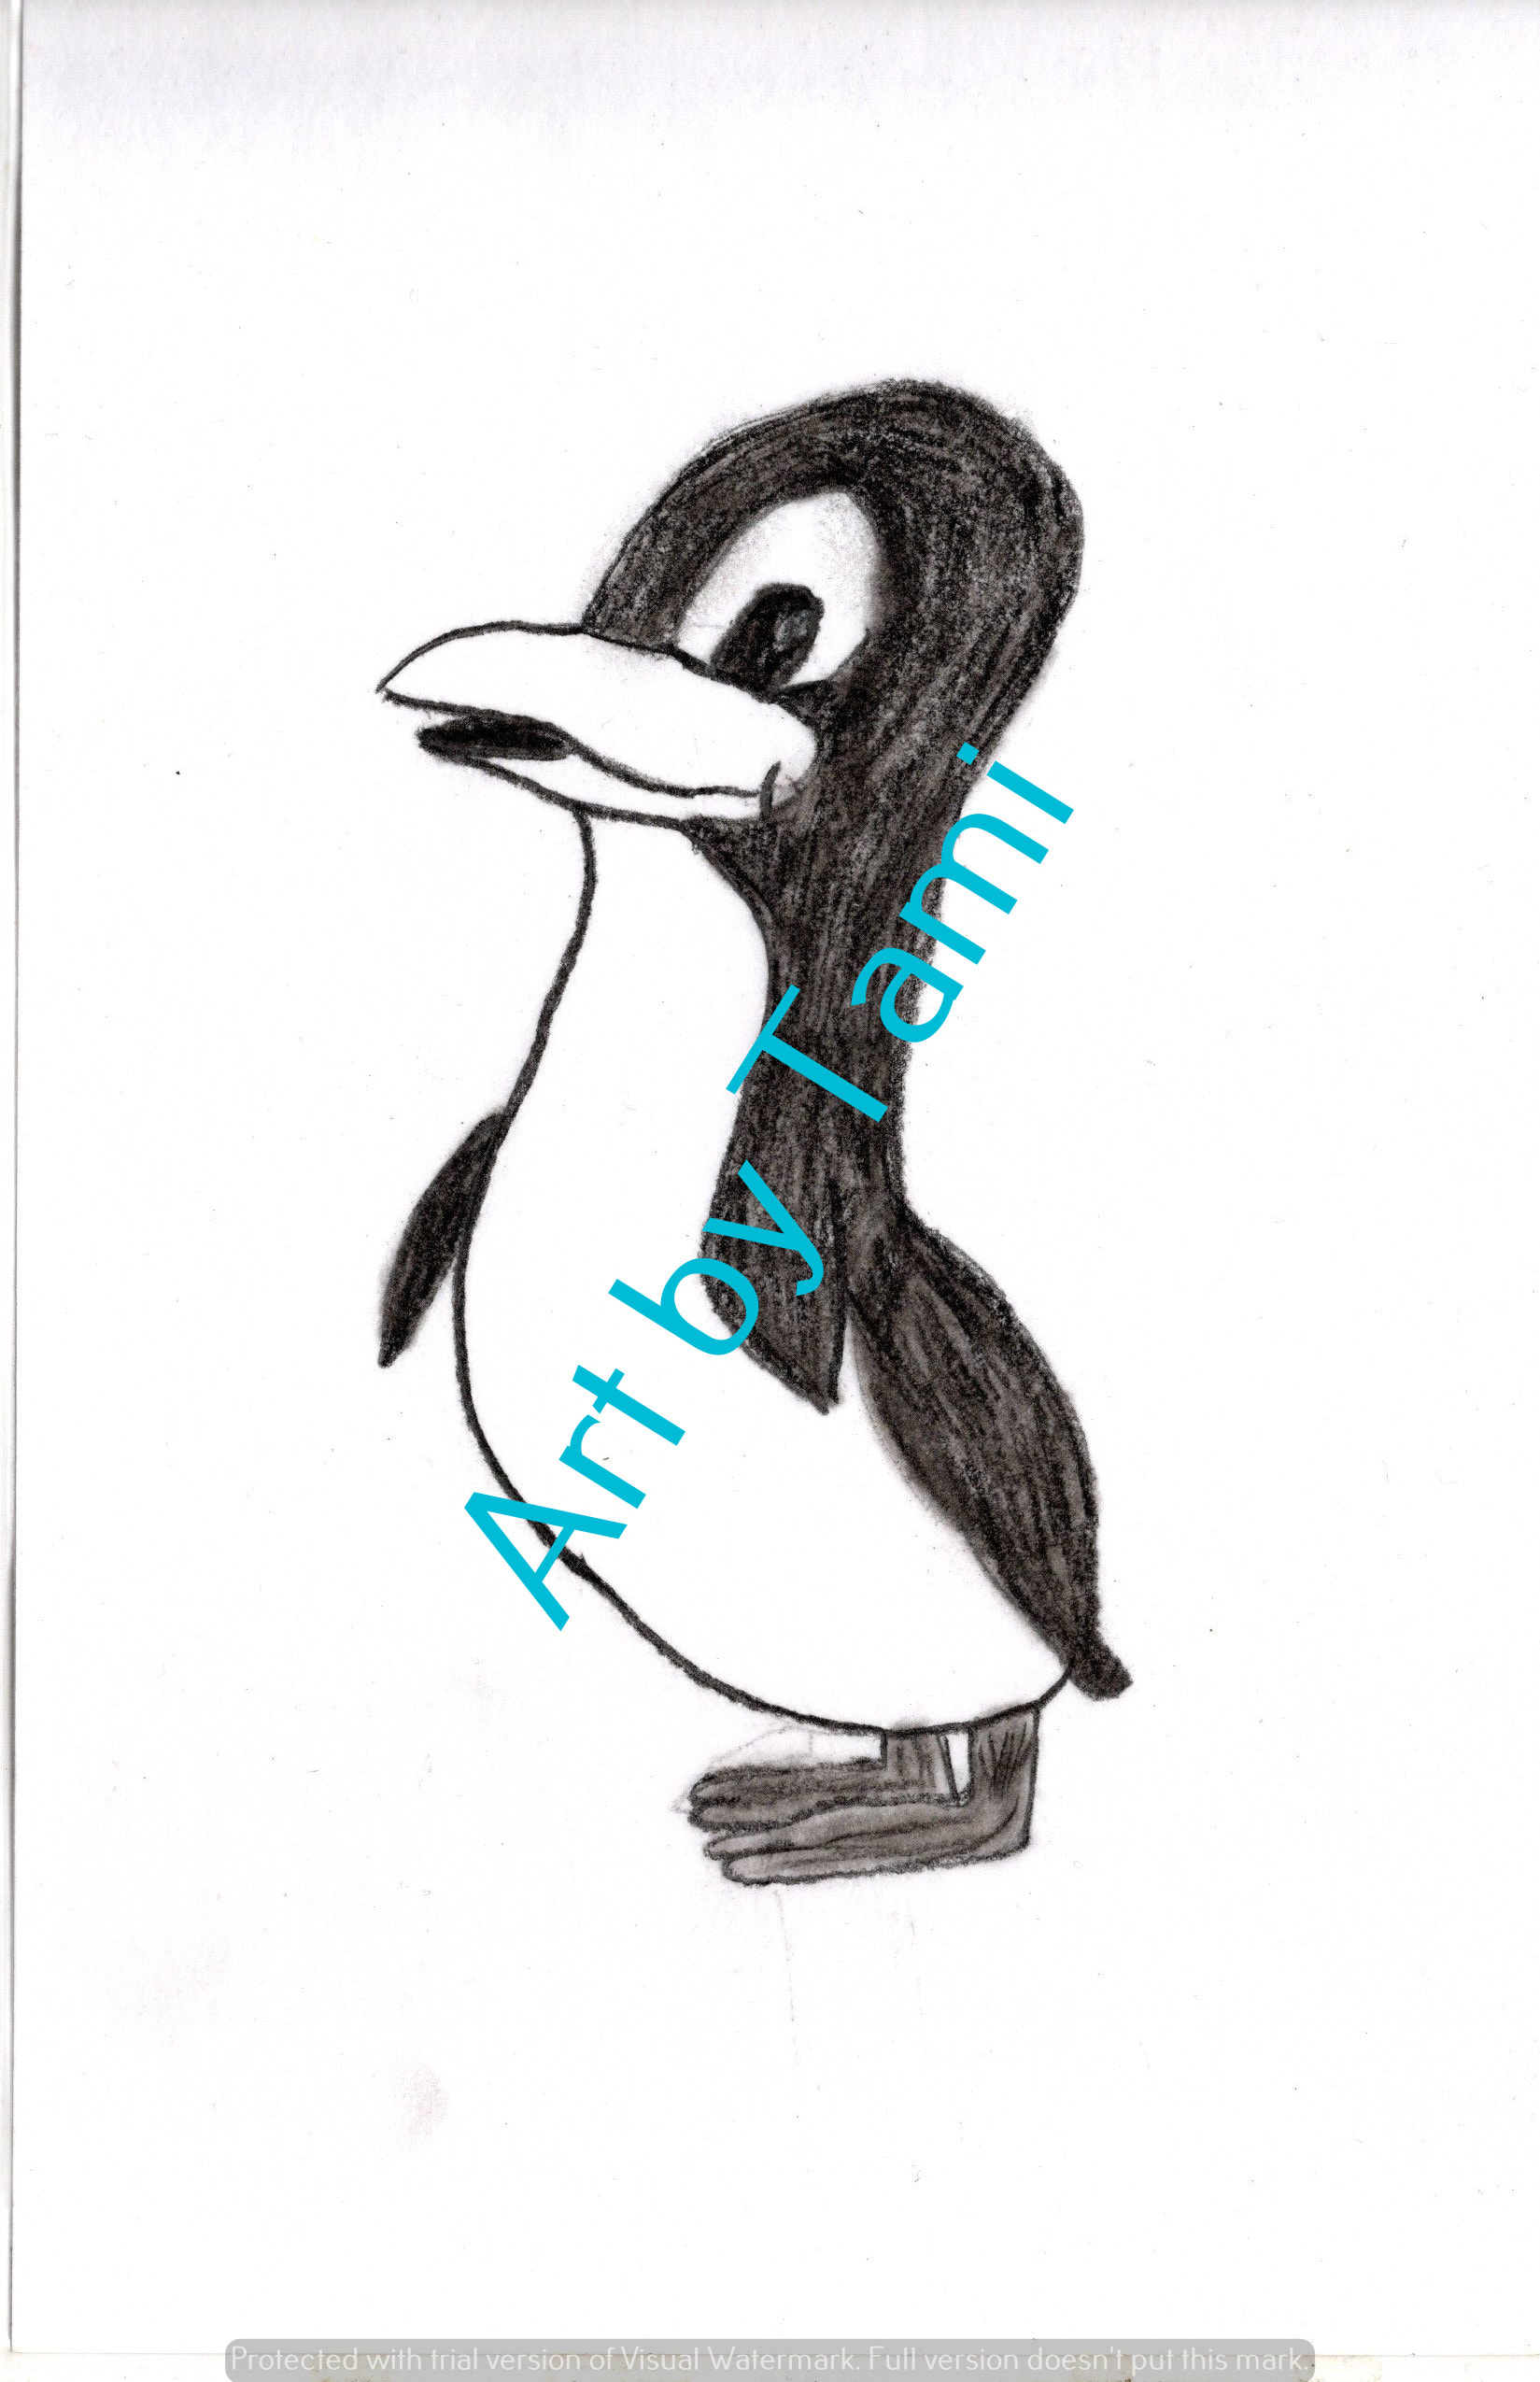 How to Draw a Penguin - Step-by-Step Easy Penguin Drawing Tutorial